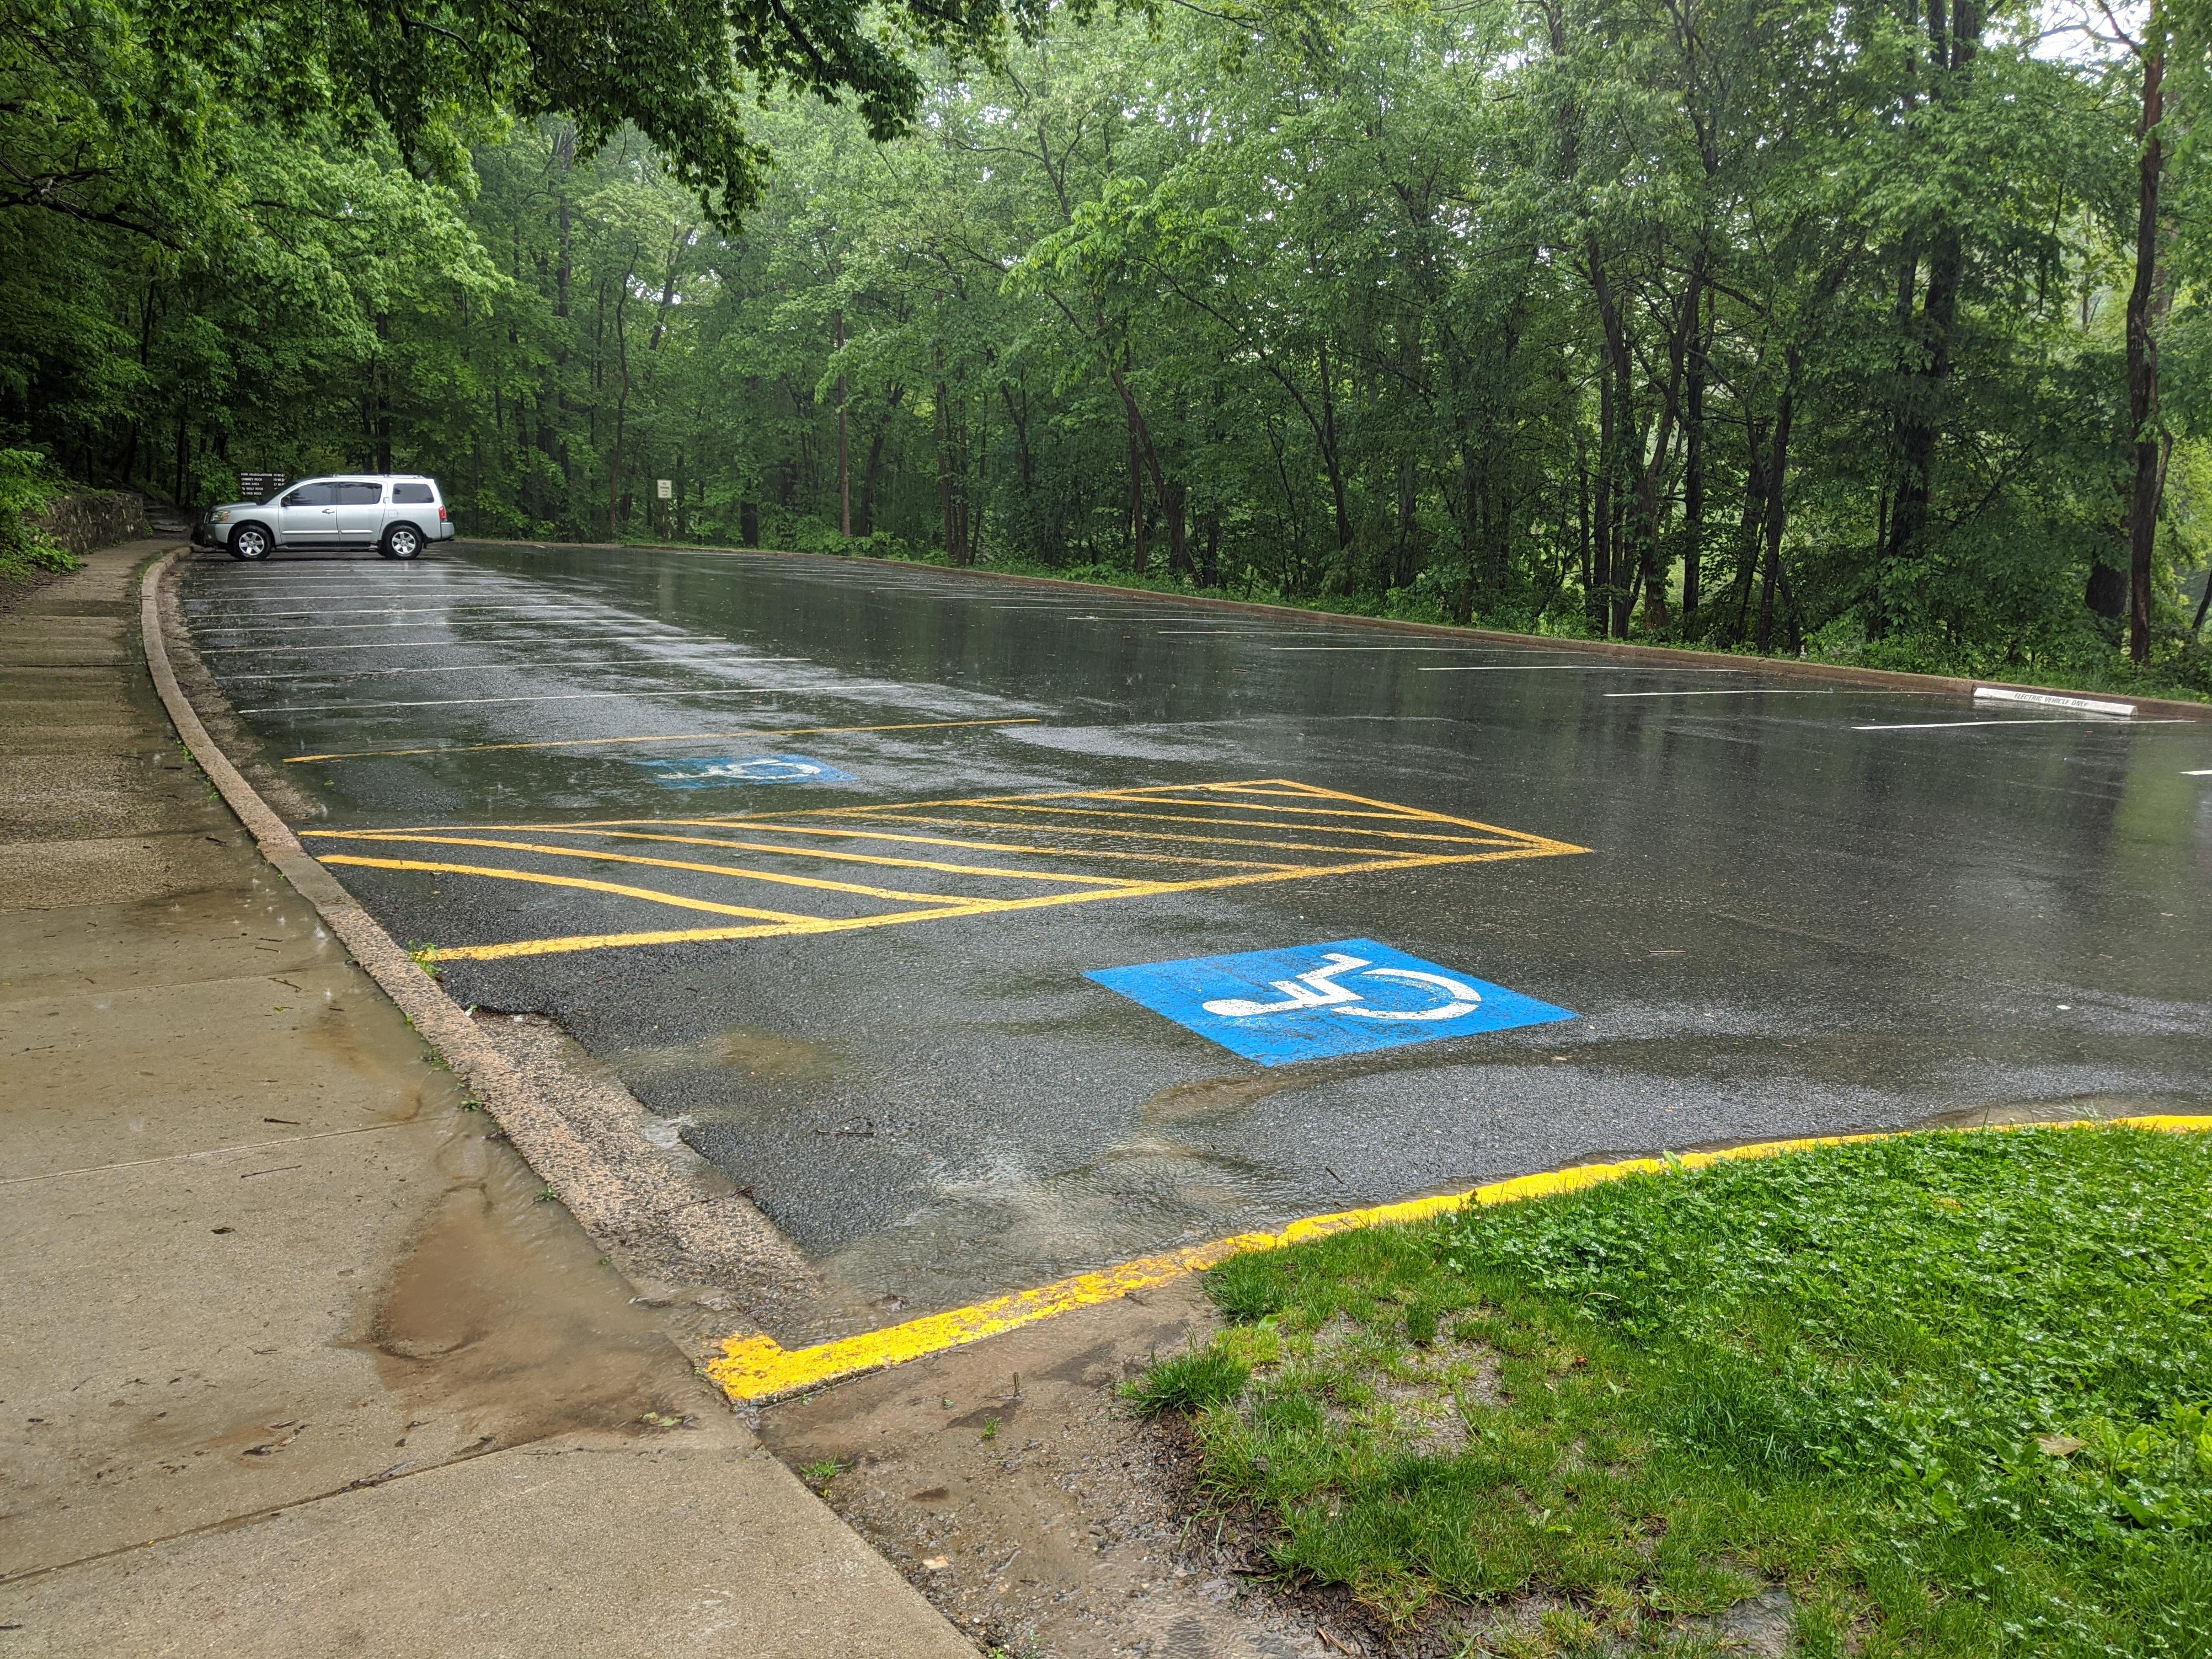 Large Asphalt Parking Area with Handicapped Parking Spaces Closest In Image. 